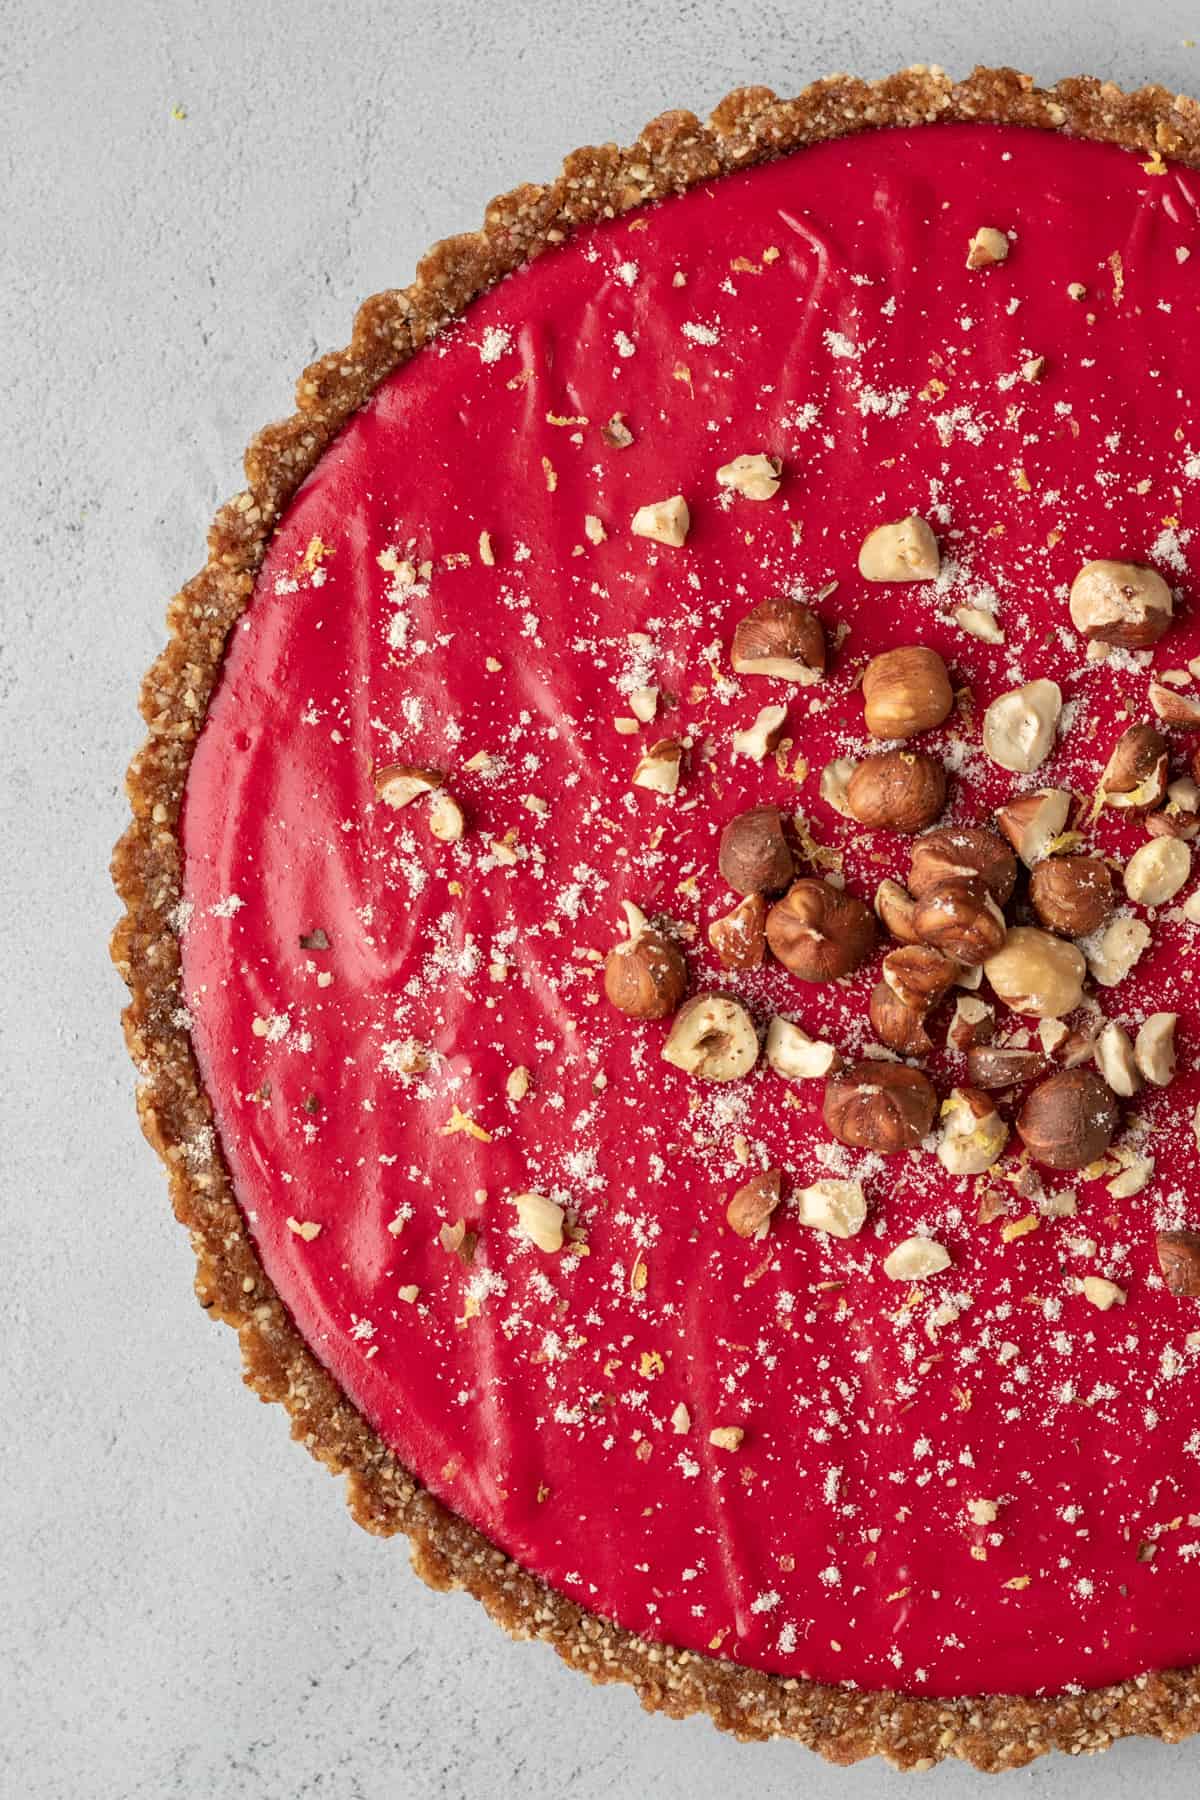 bright red tart topped with hazelnuts